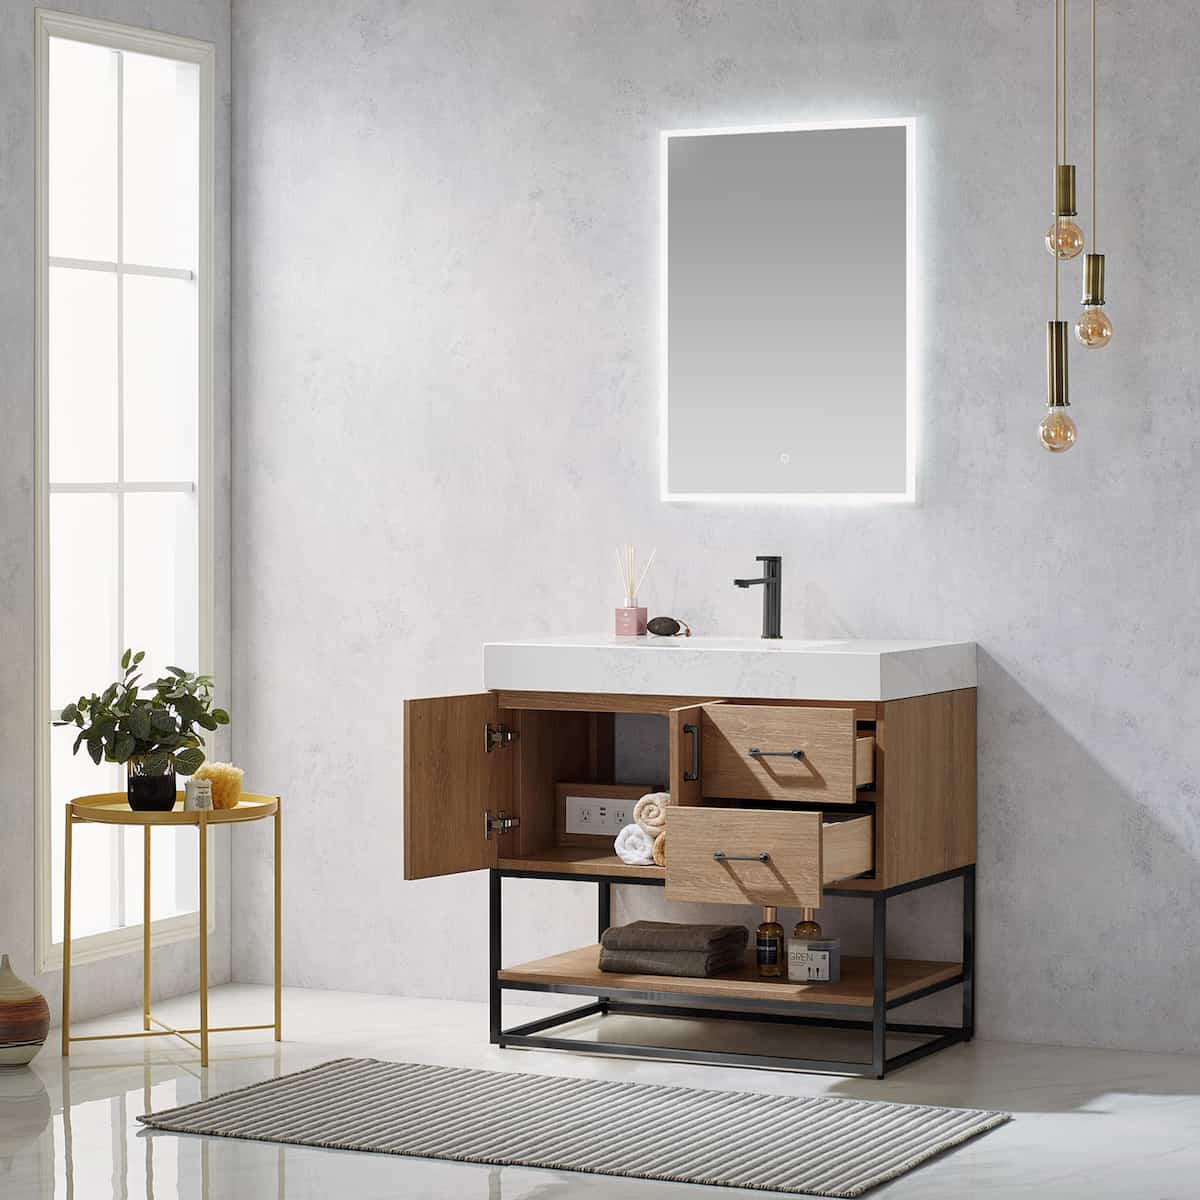 Vinnova Alistair 36 Inch Freestanding Single Vanity in North American Oak and Matte Black Frame with White Grain Stone Countertop With Mirror Inside 789036B-NO-GW